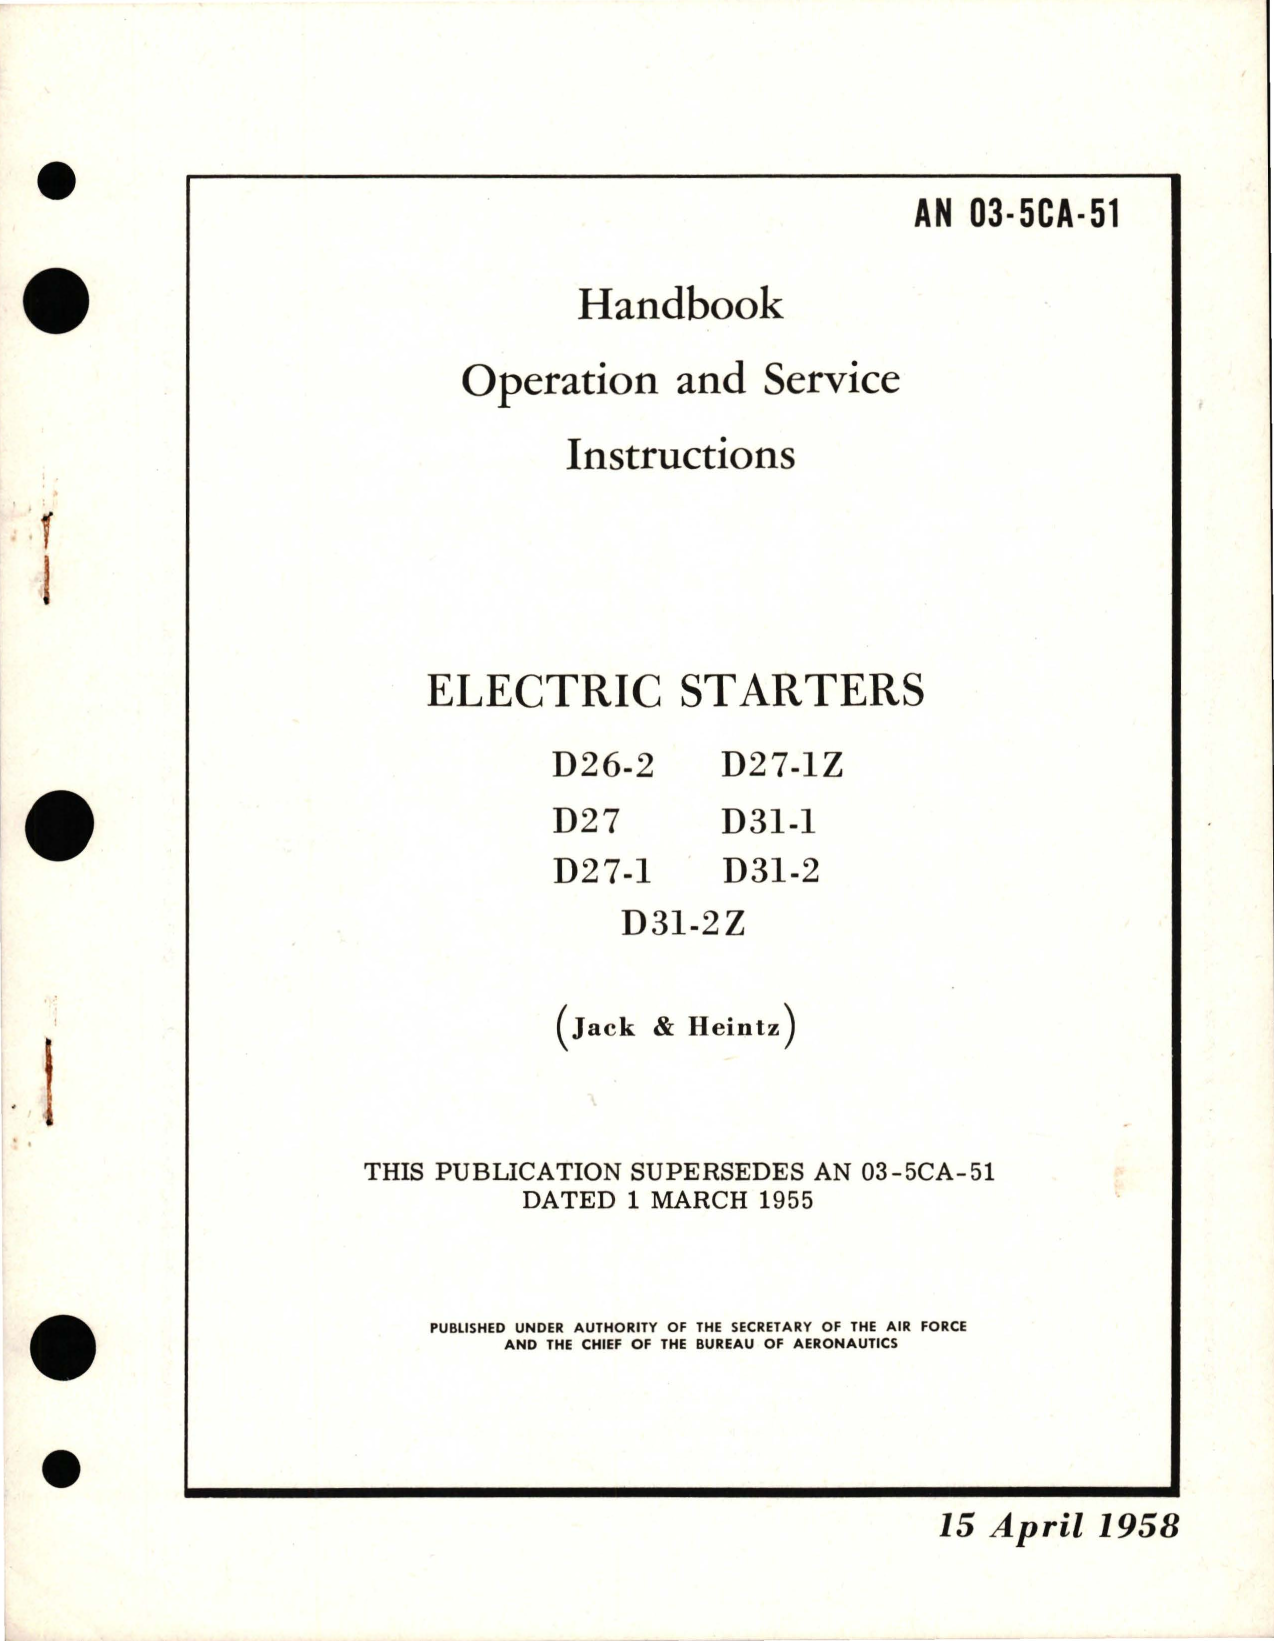 Sample page 1 from AirCorps Library document: Operation and Service Instructions for Electric Starters - D26-2, D27, D27-1, D27-1Z, D31-1, D31-2, D31-2Z 